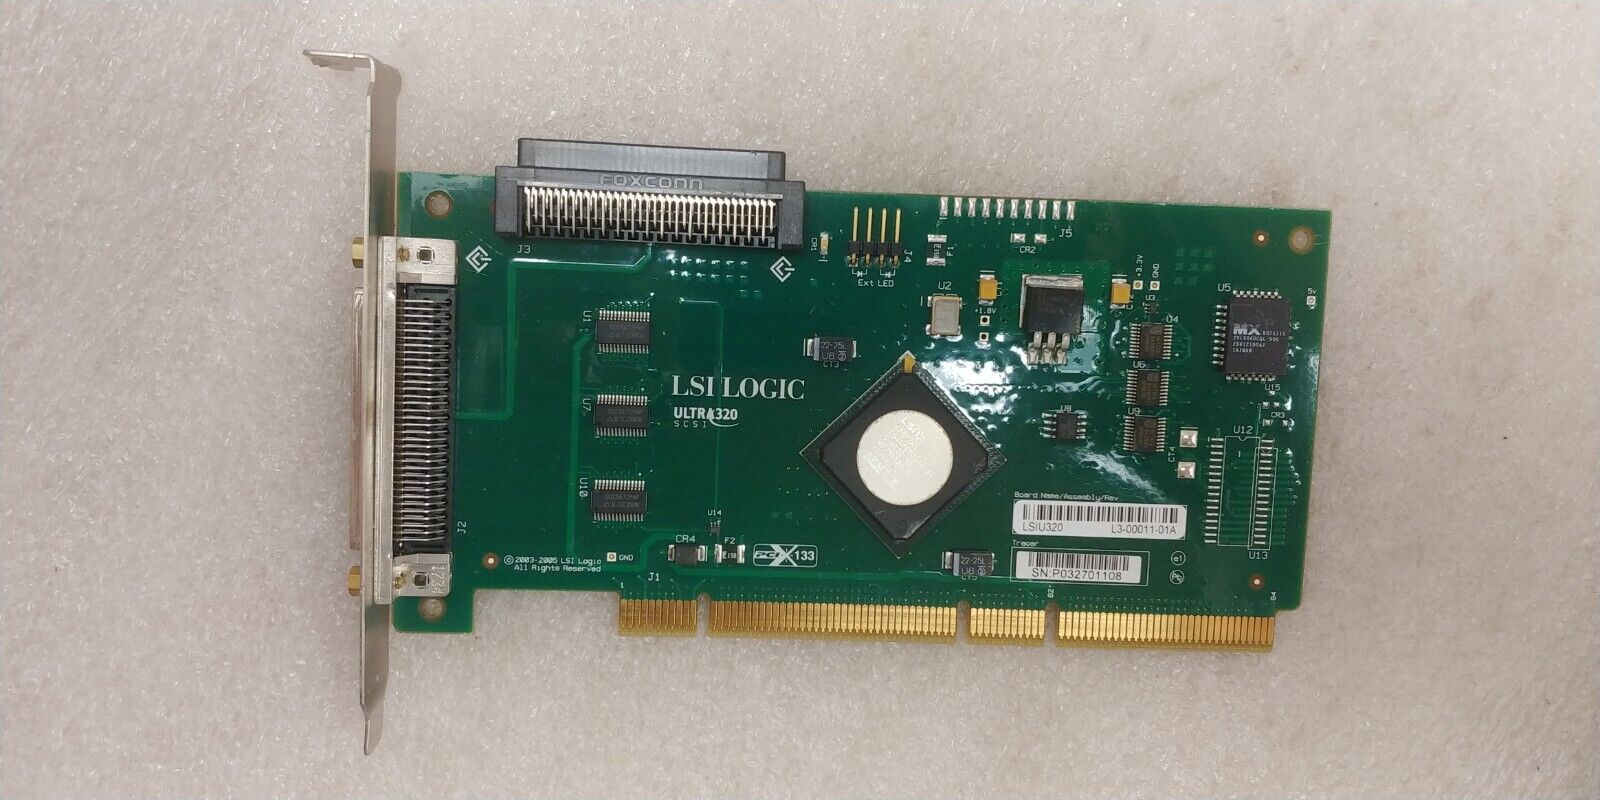 LSI Logic LSIU320 Single-Channel Ultra320 SCSI Host GREAT CONDITION 